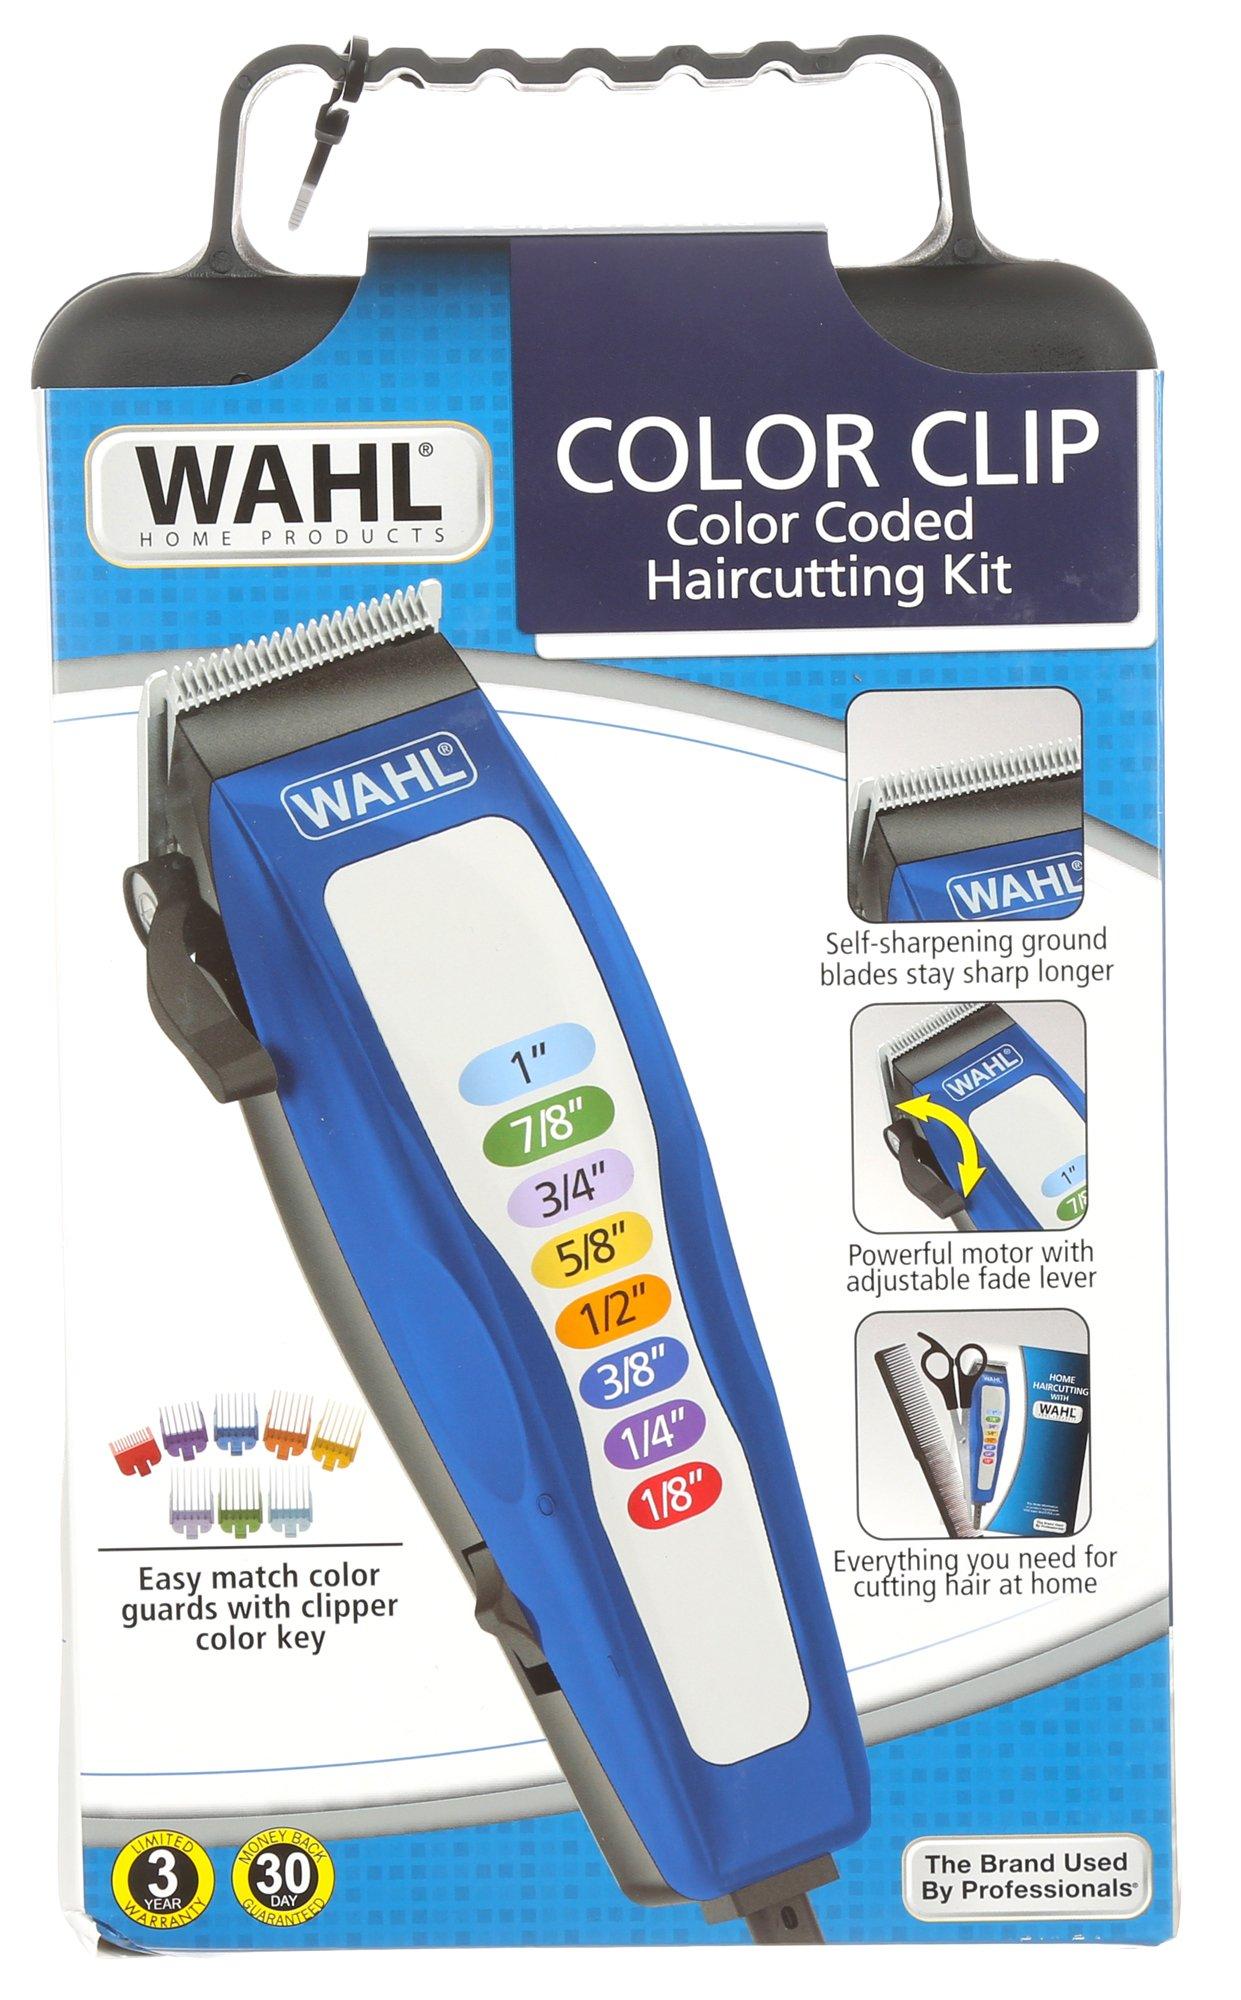 WAHL Color Coded Haircutting Kit